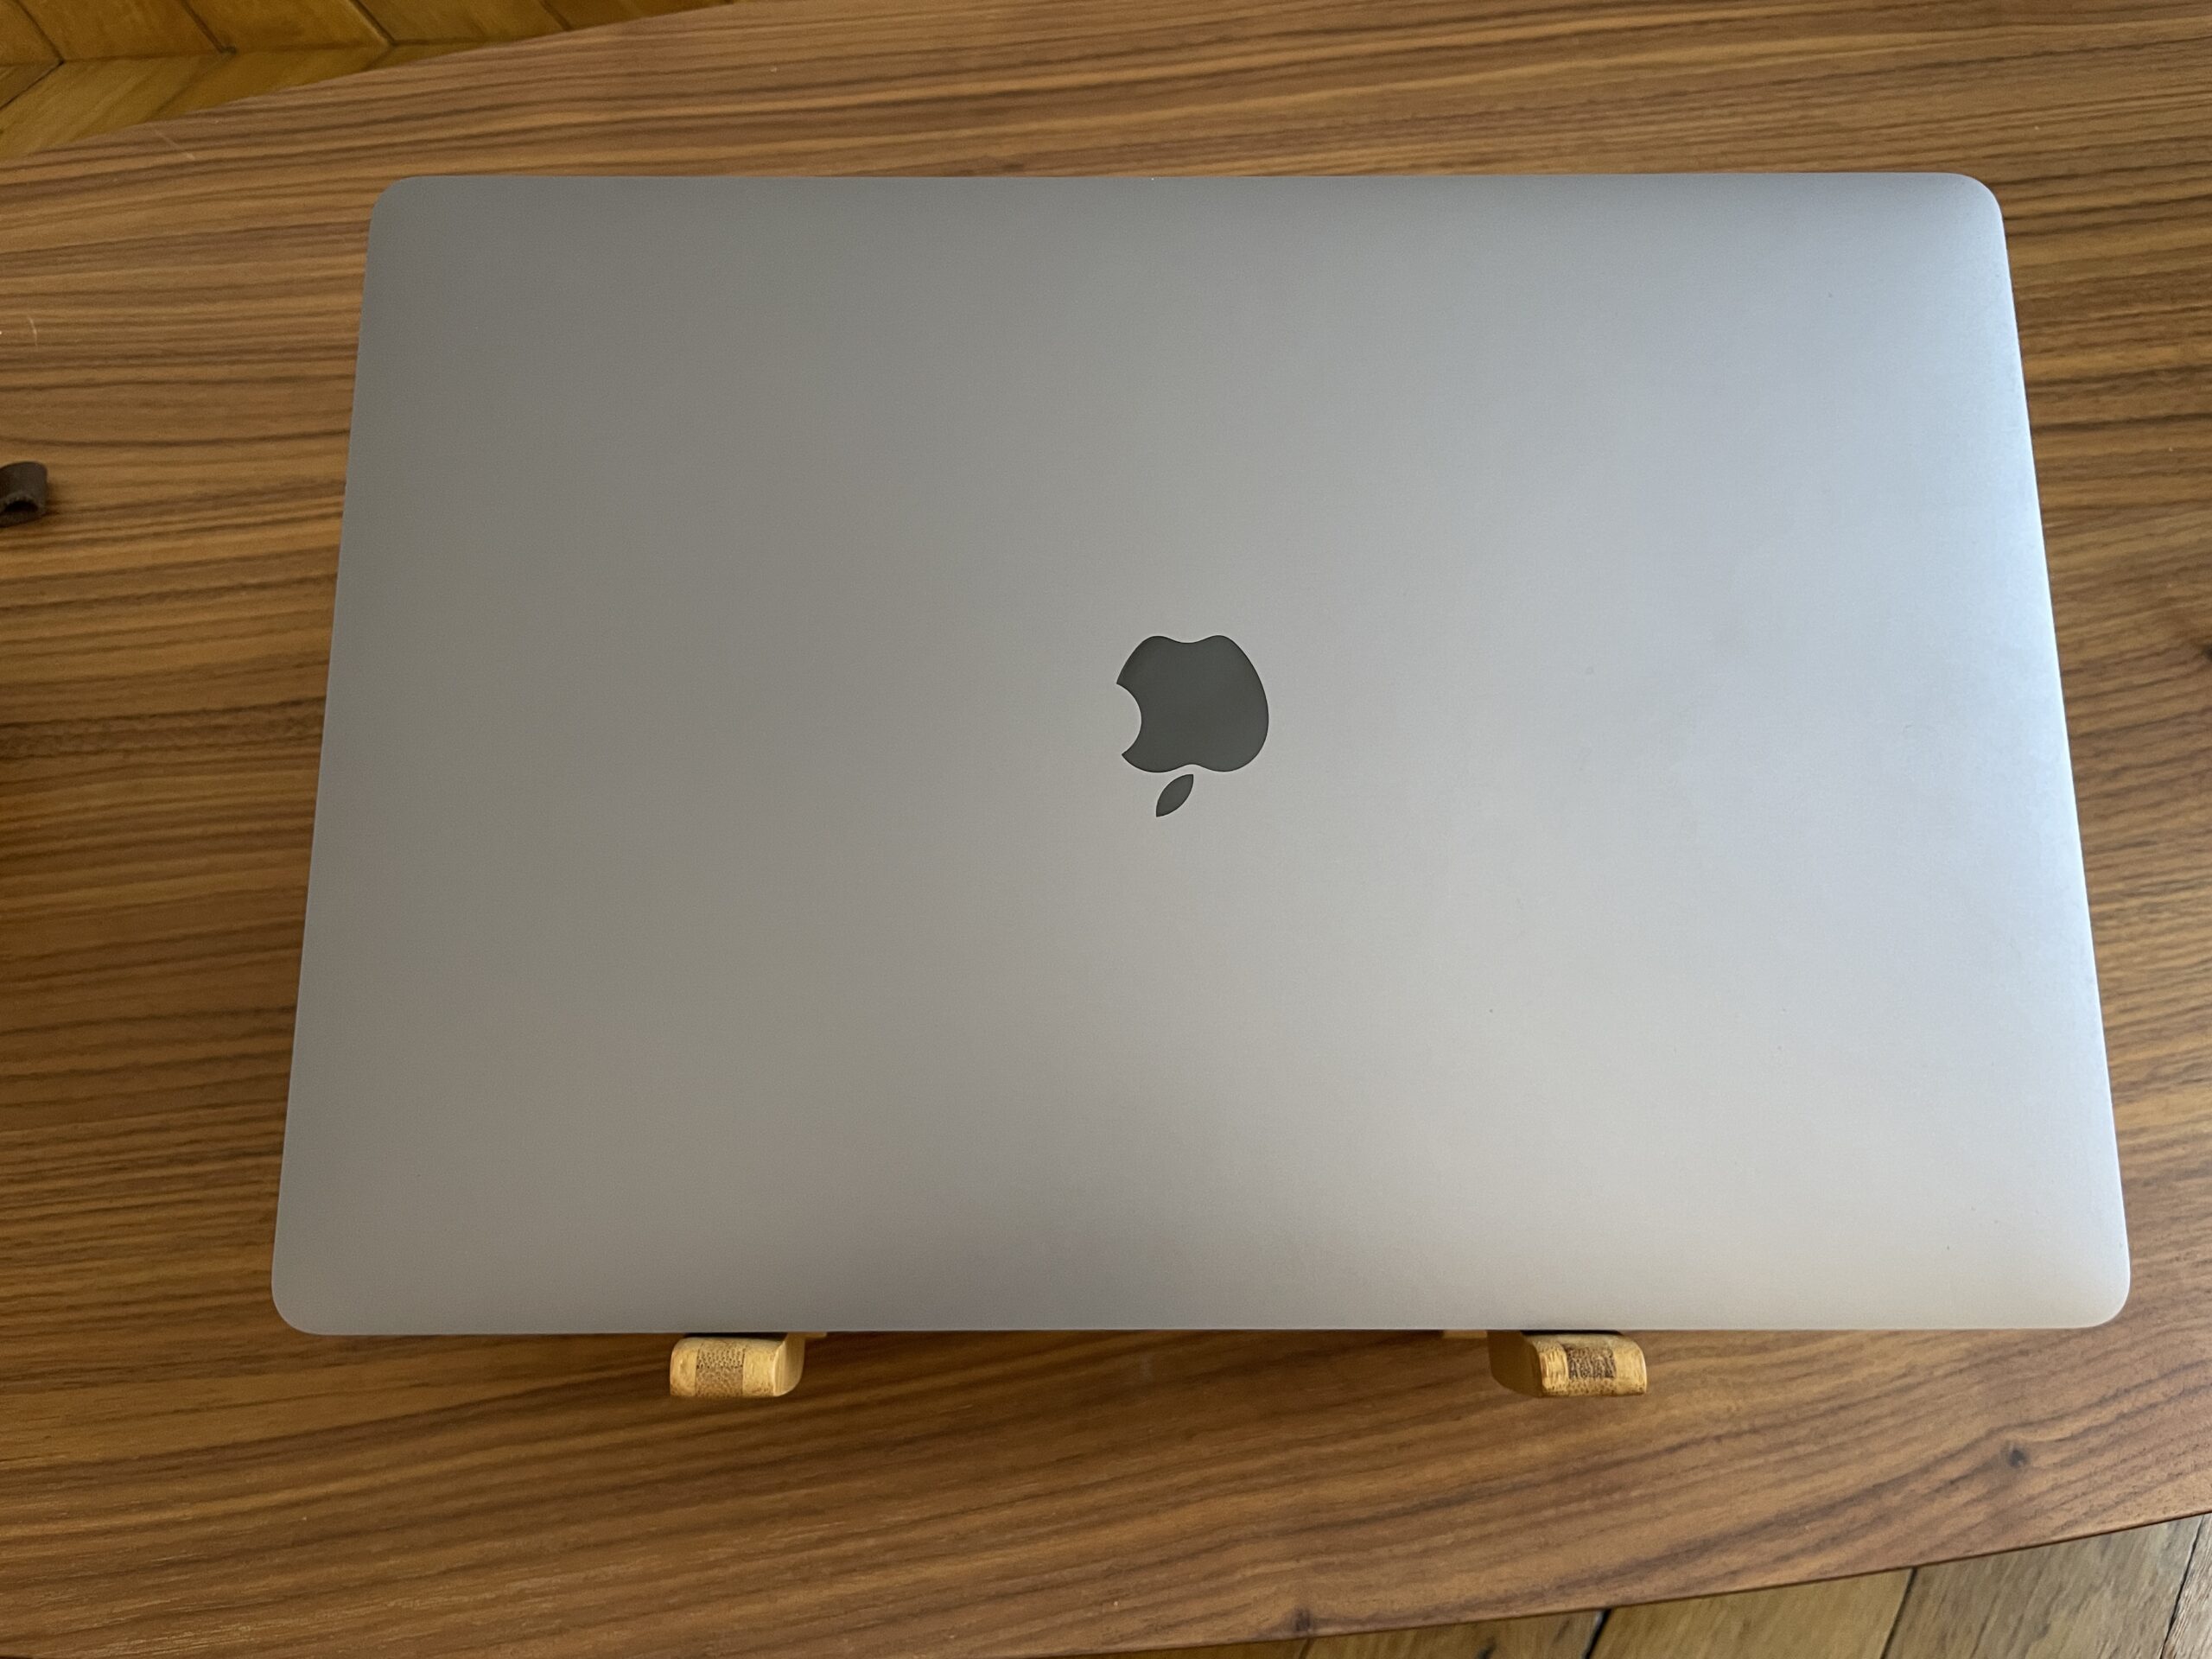 MacBook Pro 16″ 2019 – 2,3GHz core i9 – 32Go – 1To